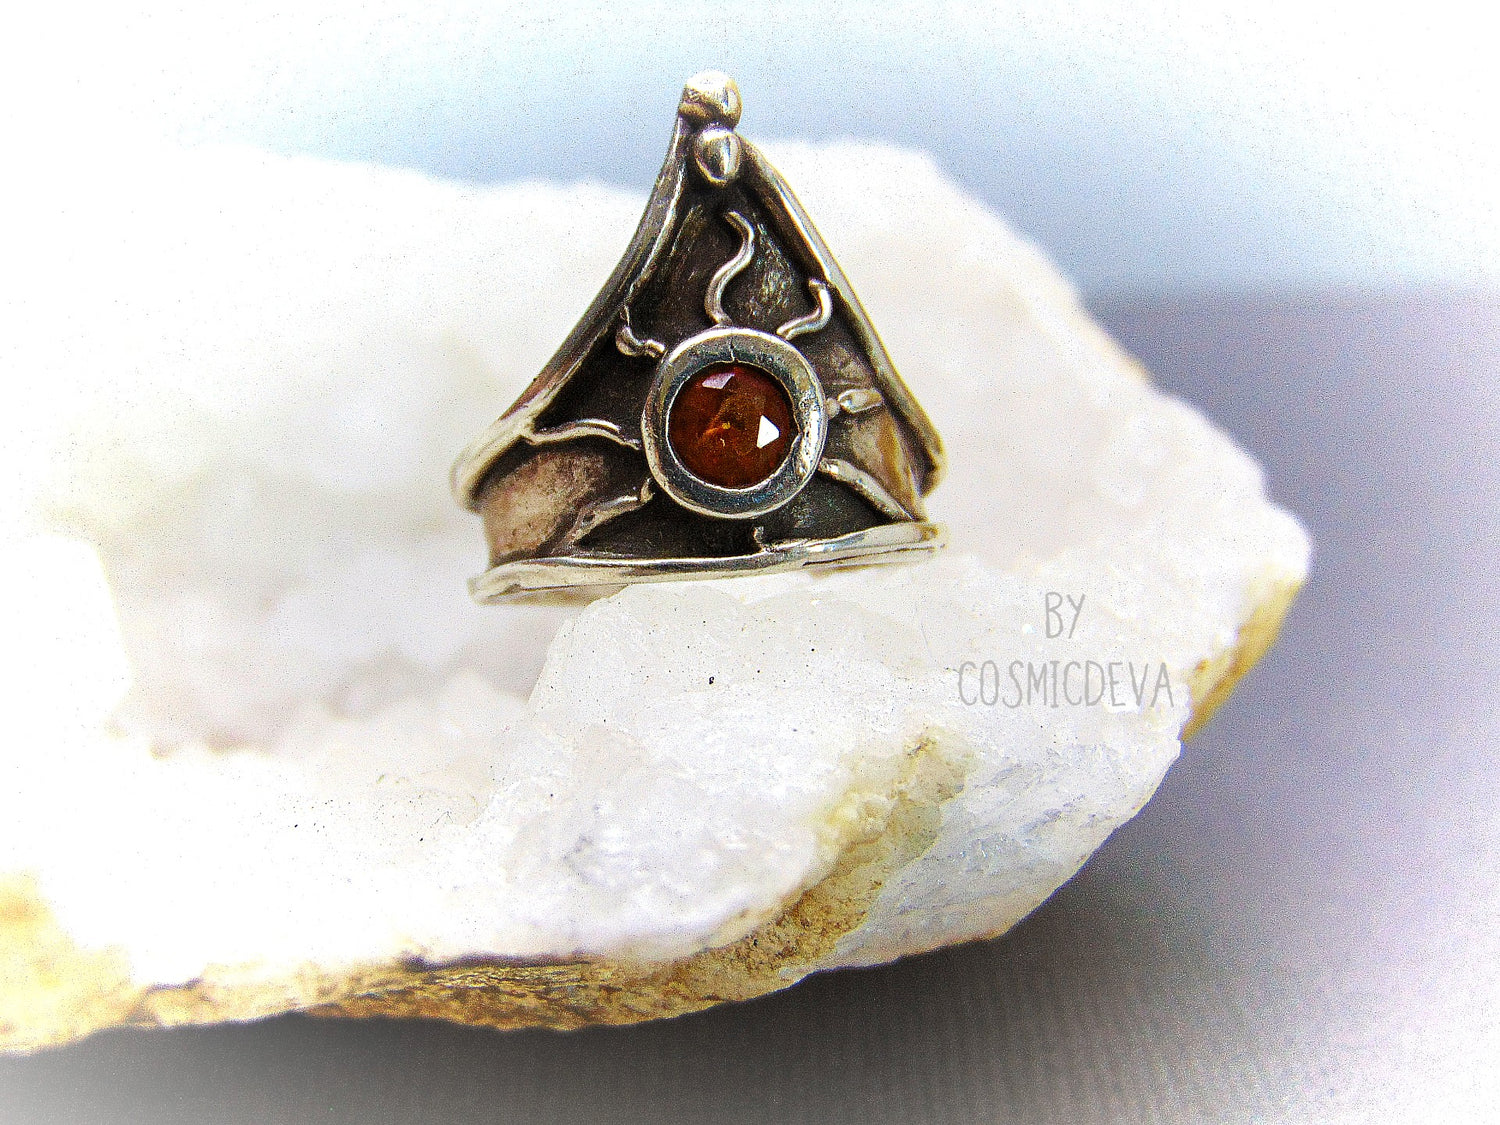 Medieval Triangle Shield Sterling Silver Citrine Size US 7.5 Ring. Beautiful hand sculptured medieval triangle shaped shield sterling silver ring with a 5 mm round citrine stone. This Ring is made of solid pure .950 sterling silver and hallmarked as it. The ring was oxidized to give it a vintage antique design. - CosmicDeva